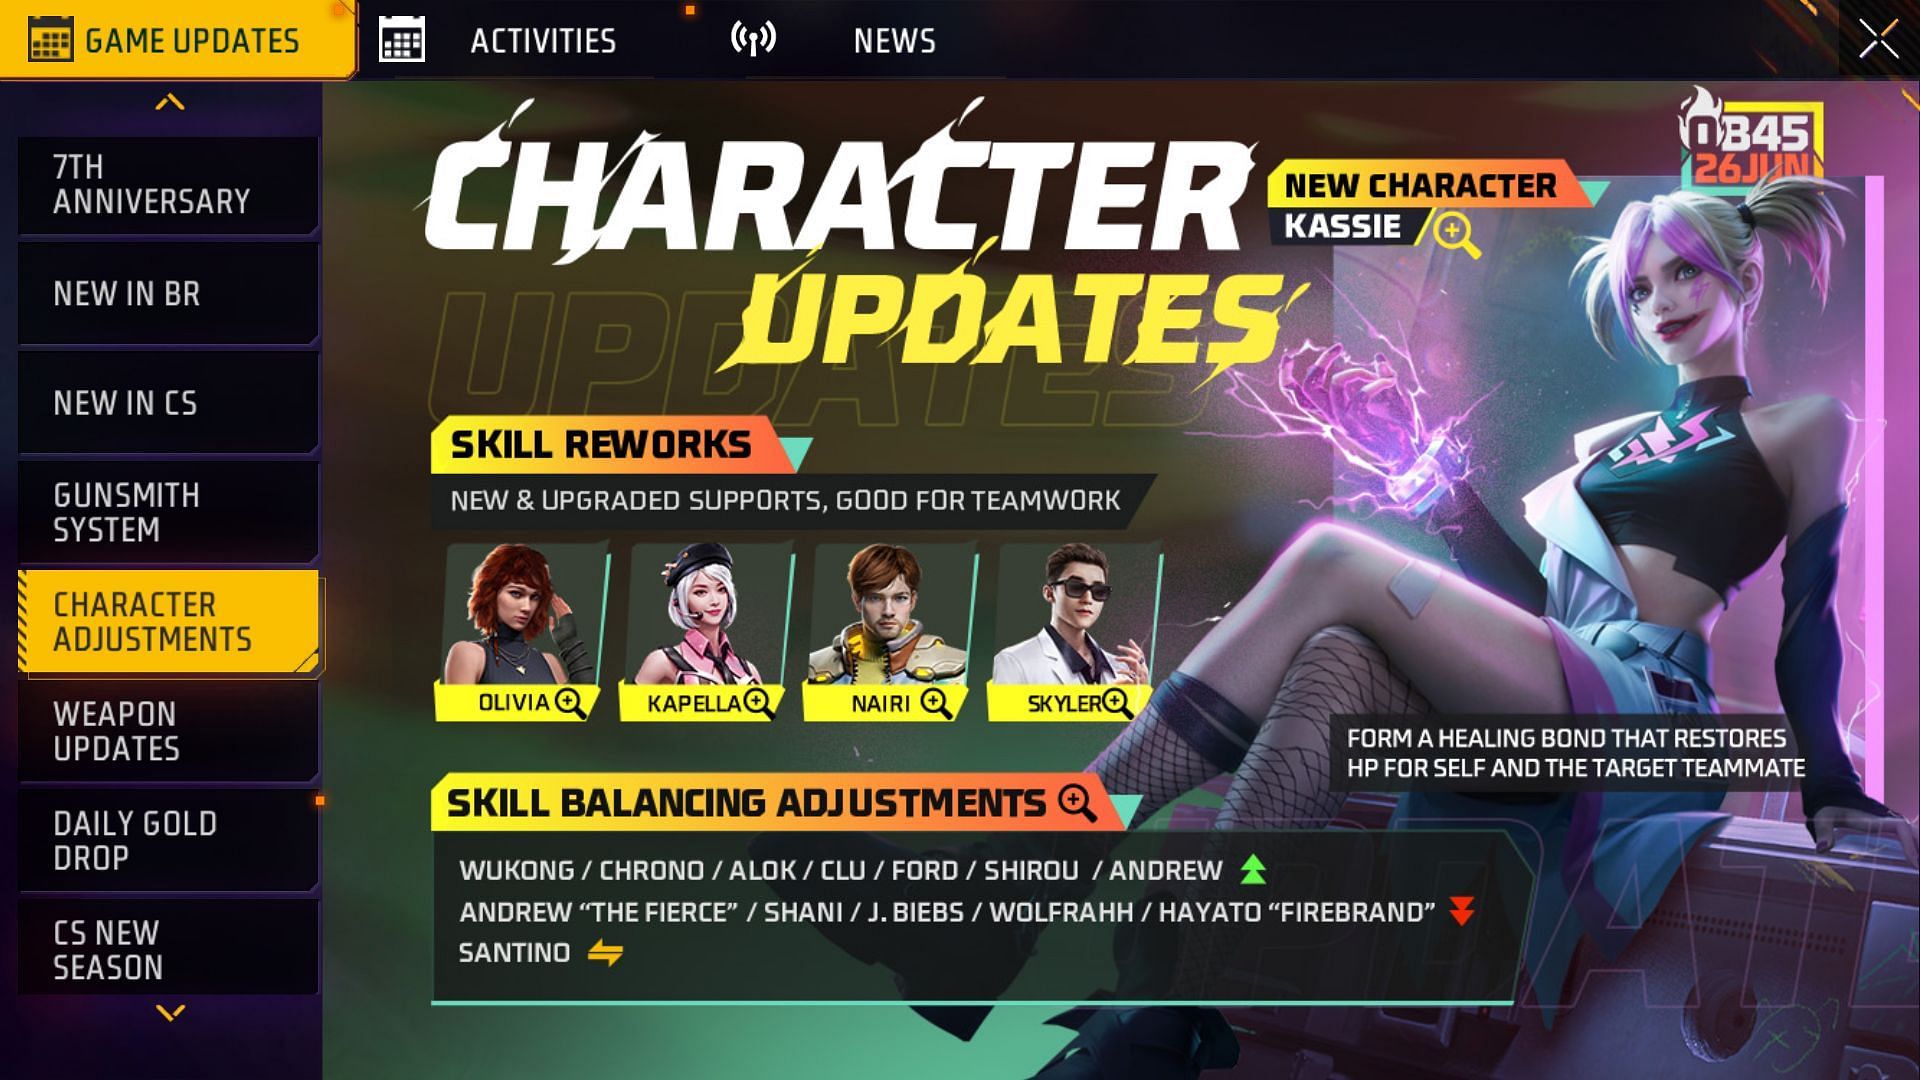 Features of the OB45 update (Image via Garena)